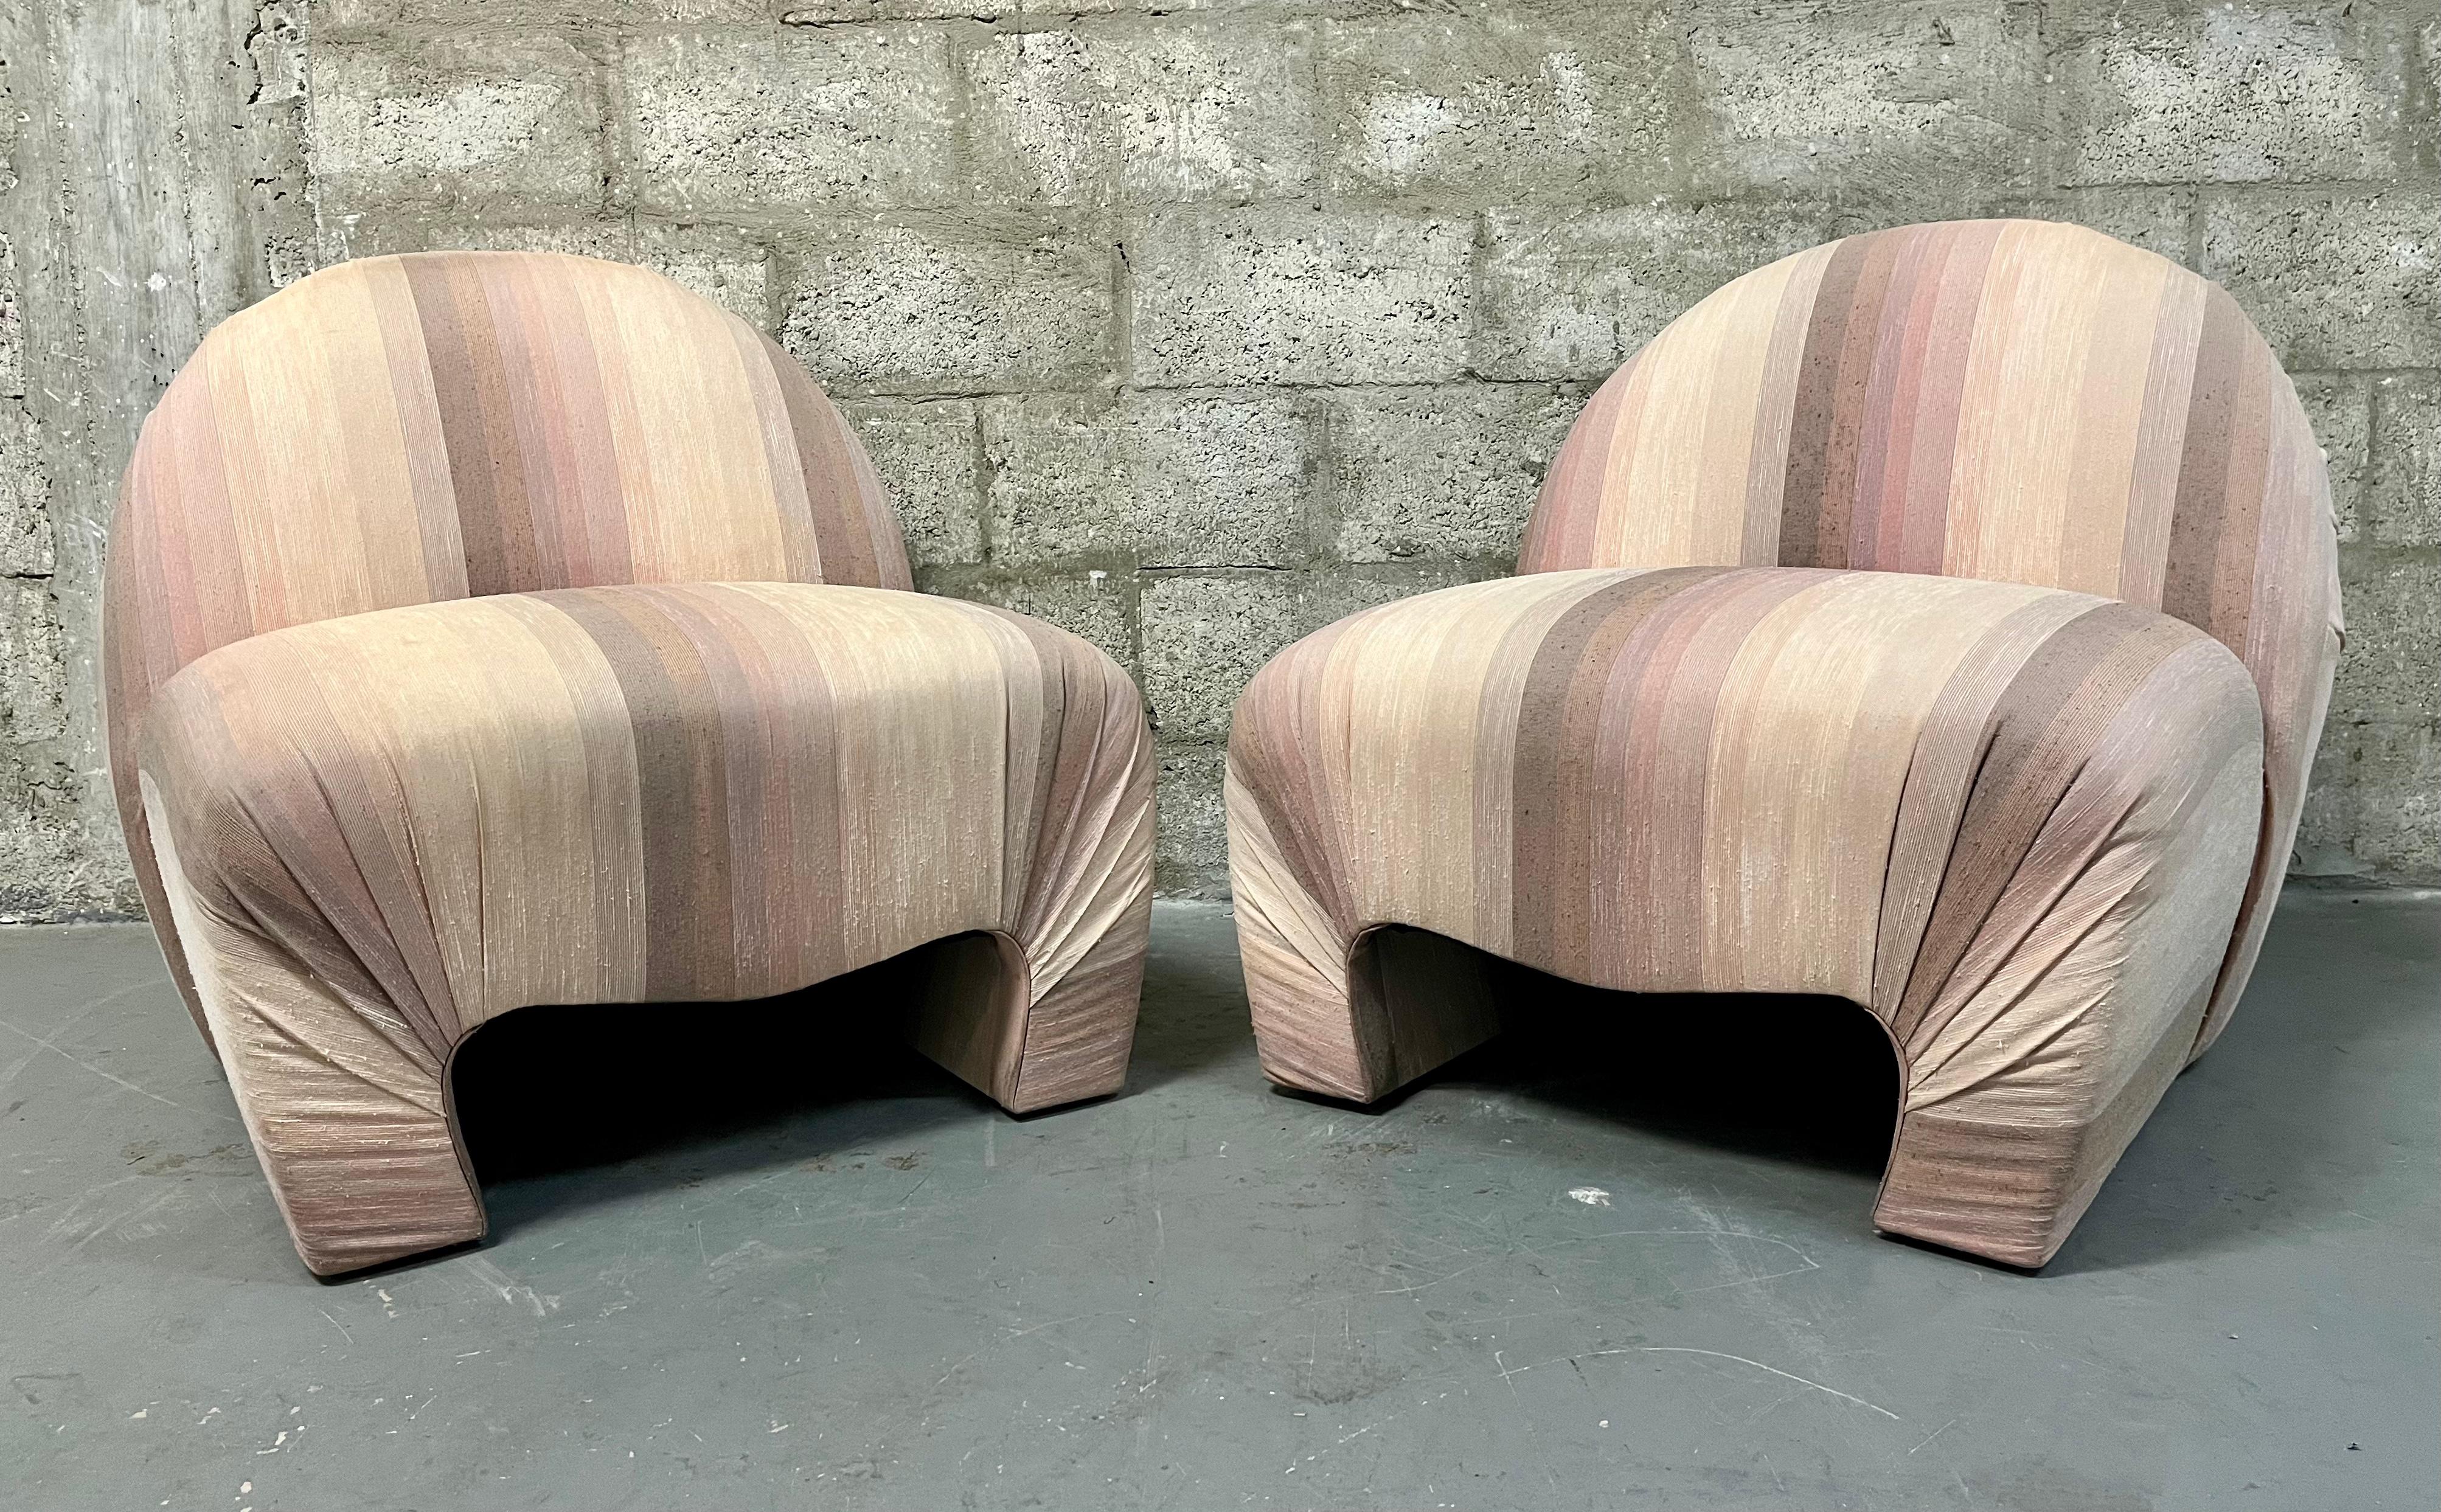 Post-Modern A Pair of Lounge Chairs in the Vladimir Kagan for Weiman Style. Circa 1980s